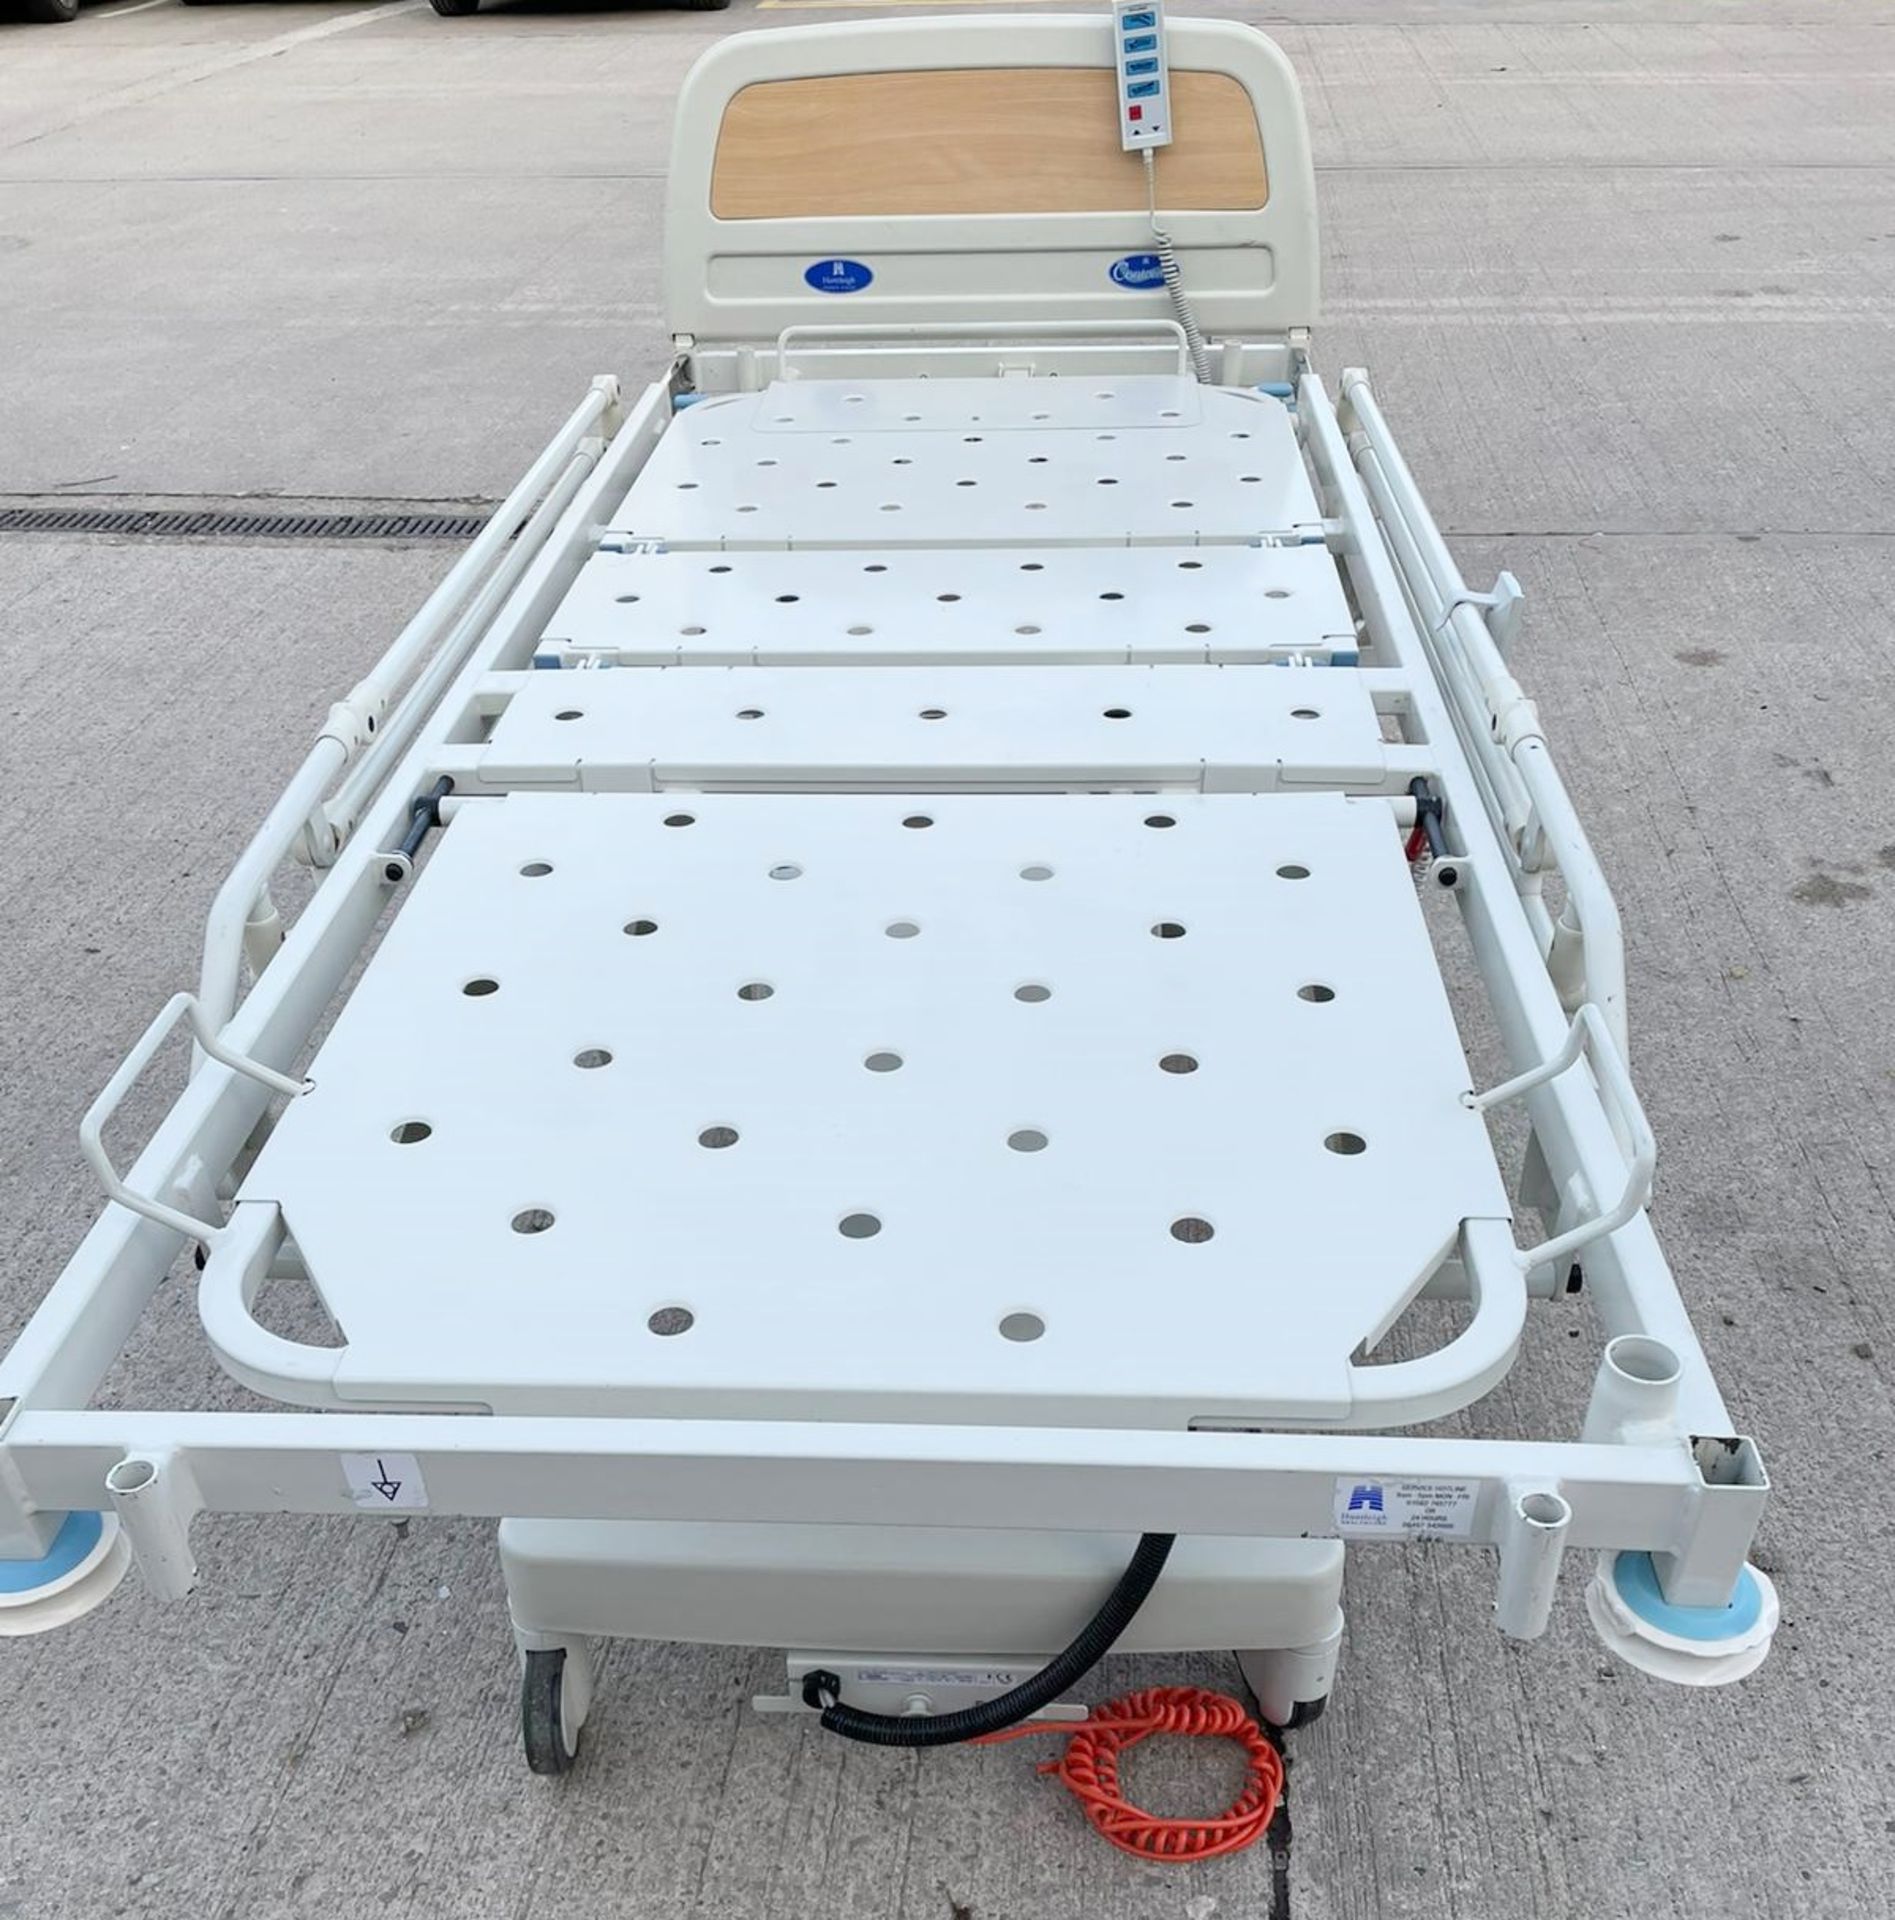 1 x Huntleigh CONTOURA Electric Hospital Bed - Features Rise/Fall 3-Way Profiling, Side Rails, - Image 6 of 13